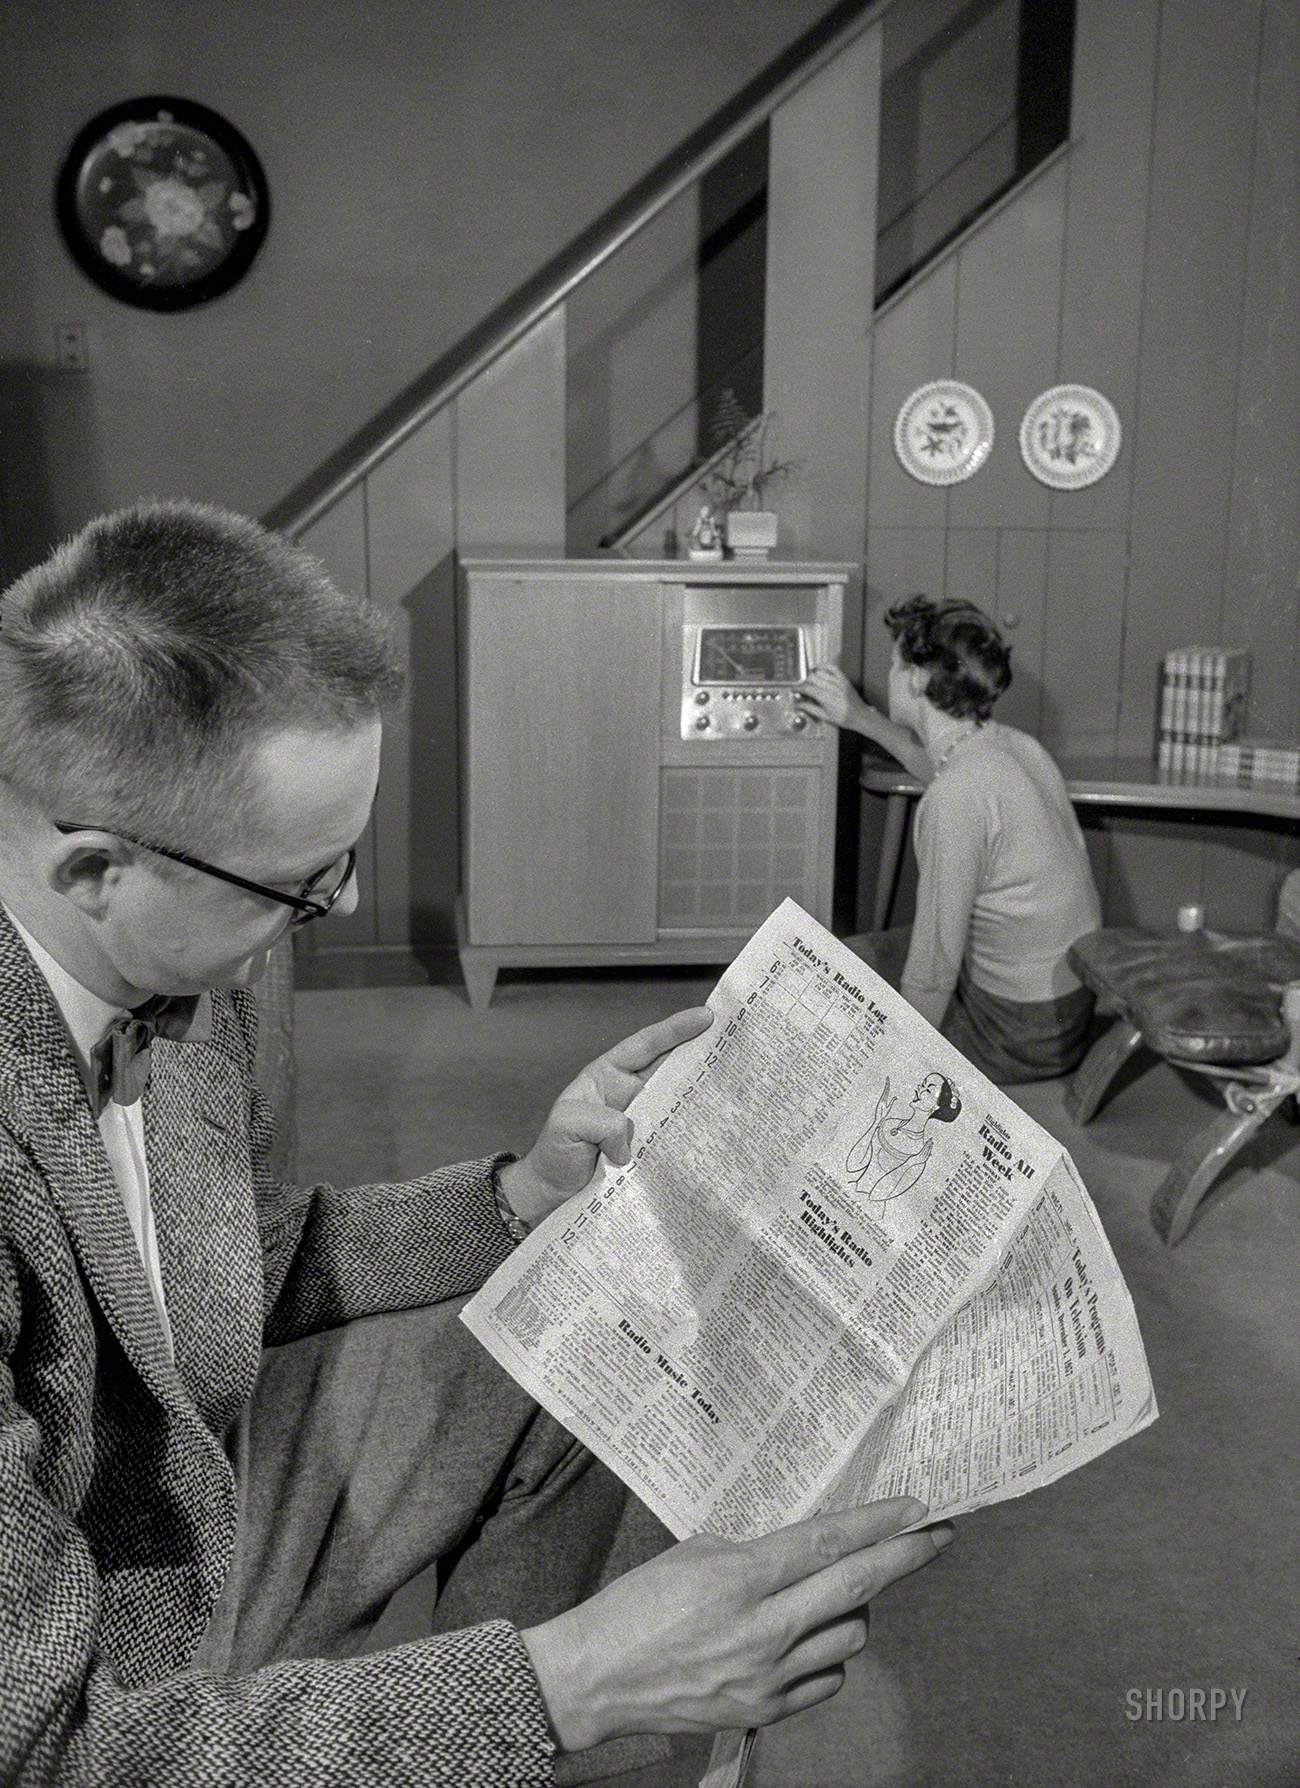 December 1957. Washington, D.C. "Man with broadcast listings; woman tunes radio." The console set, seen earlier here, is evidently a portable, or maybe this is a two-radio household. News Photo Archive 35mm negative. View full size.